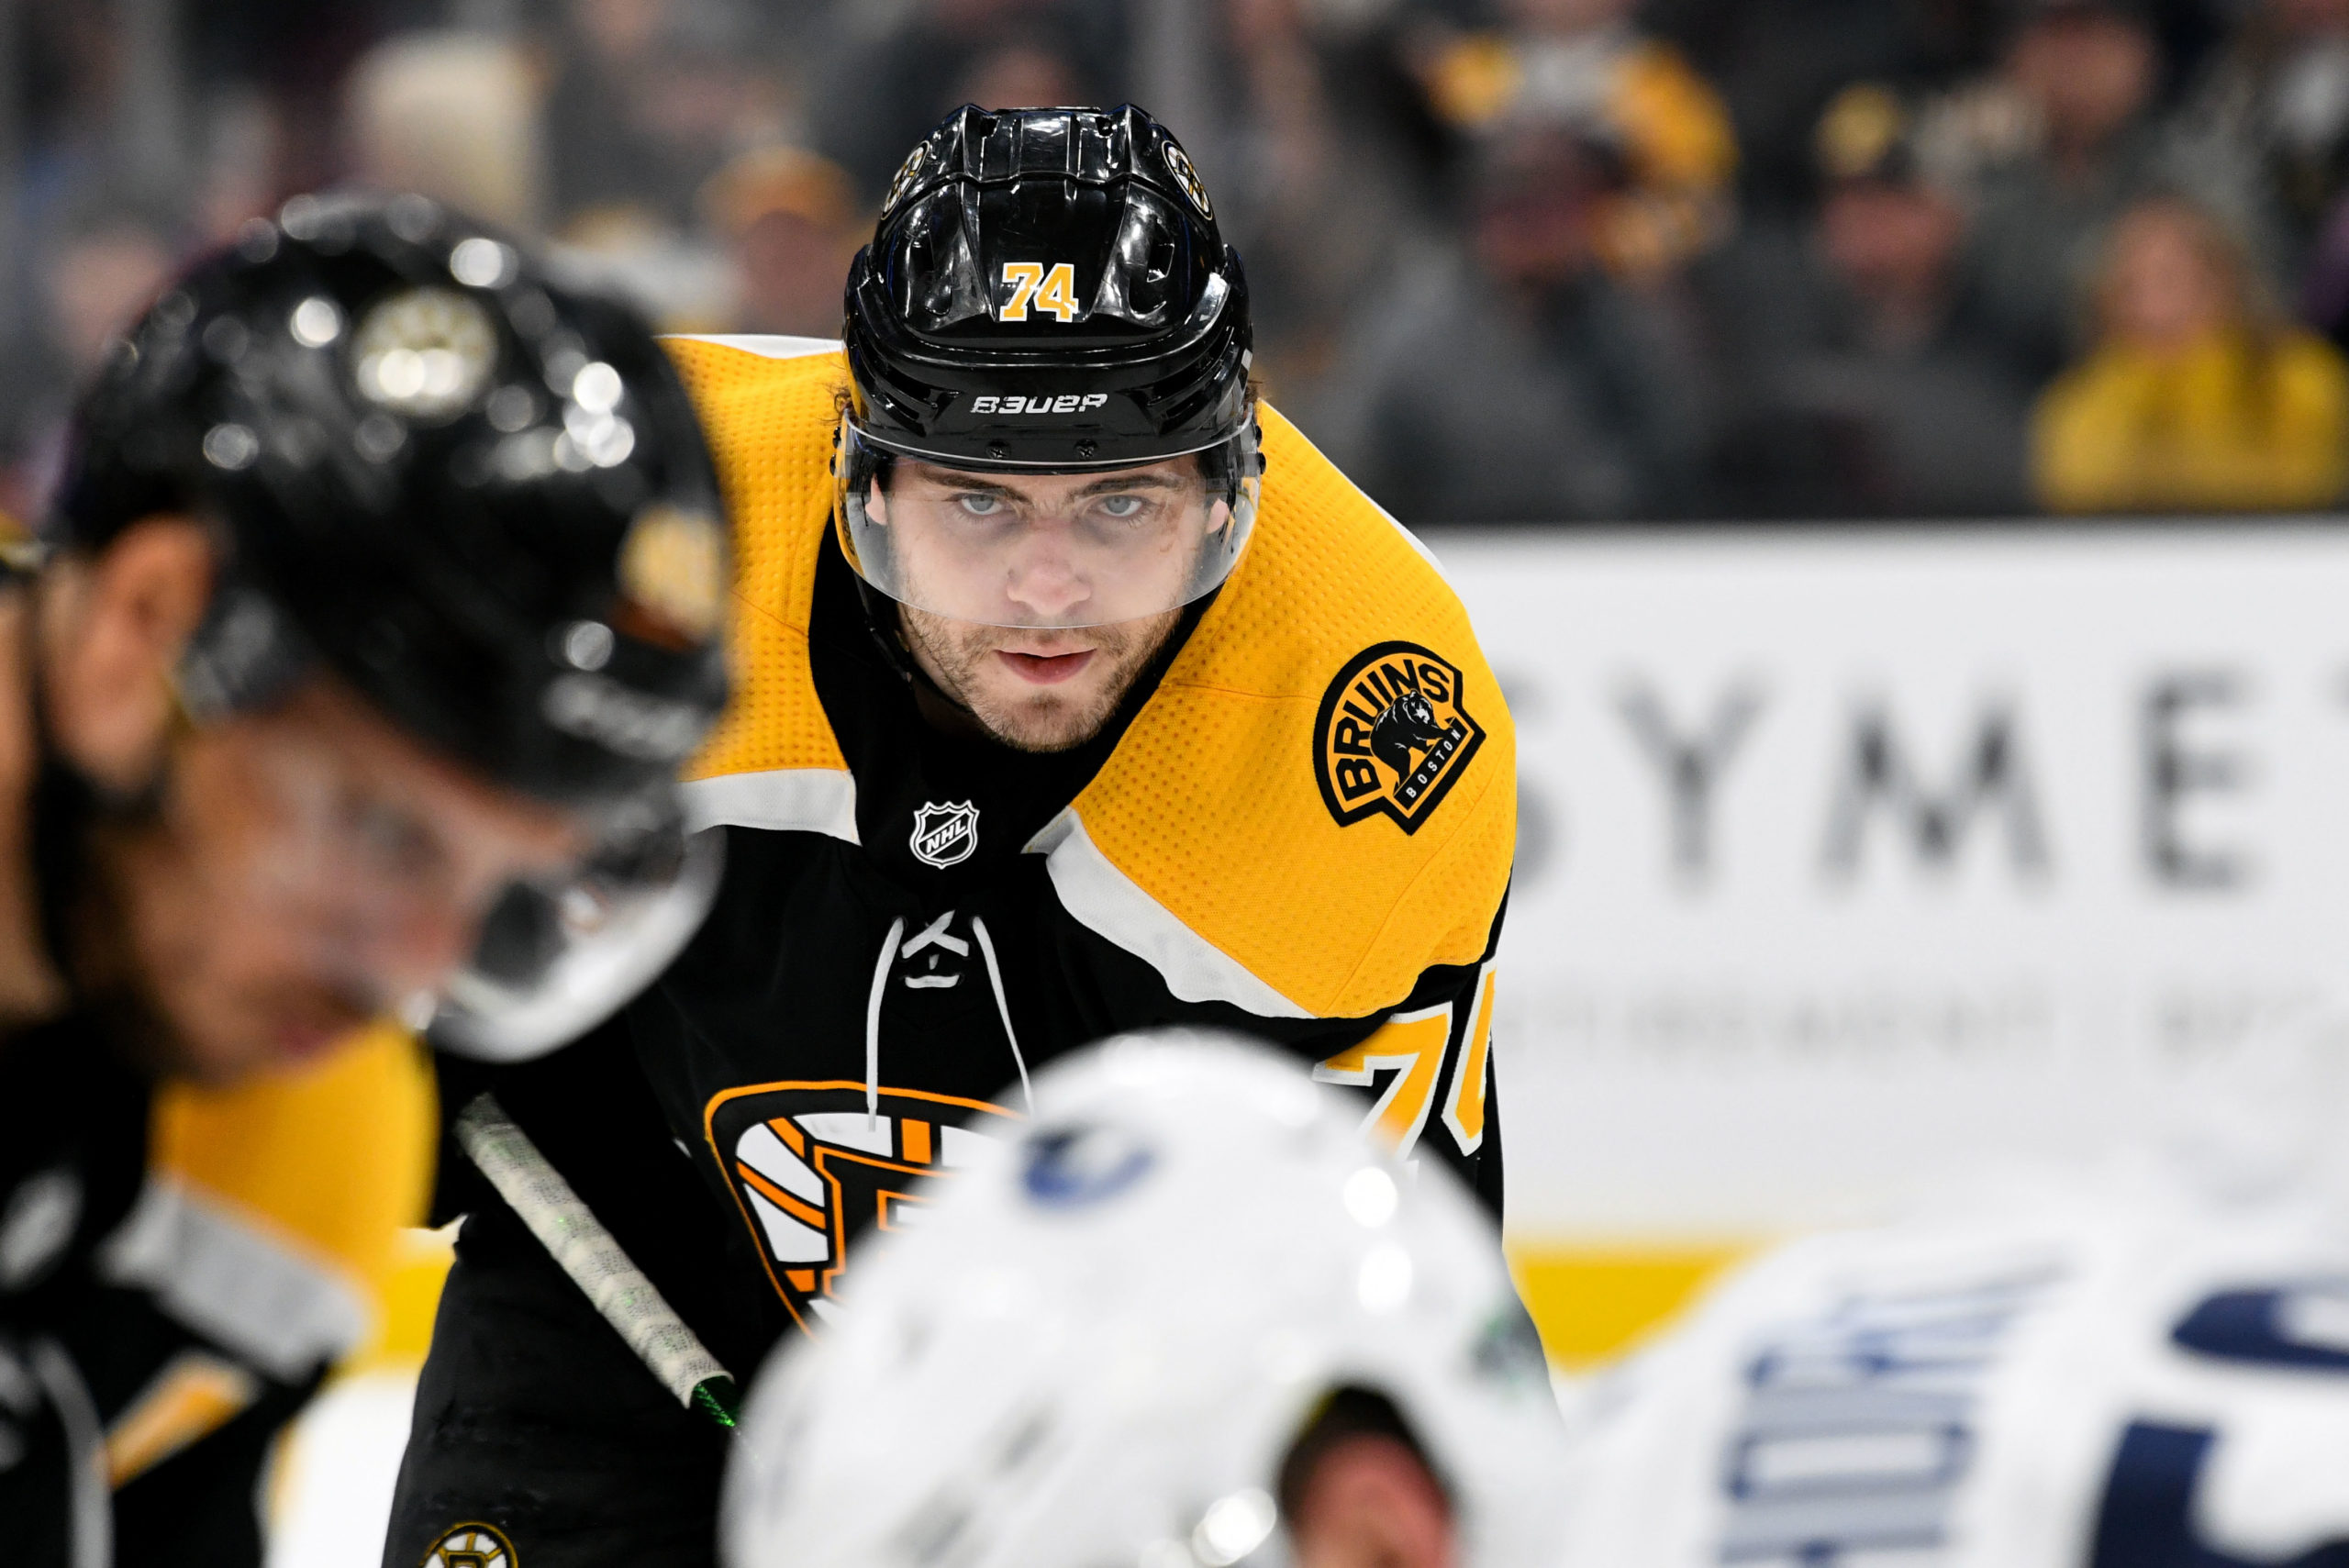 DeBrusk: “I Wasn’t Where I Wanted to Be”